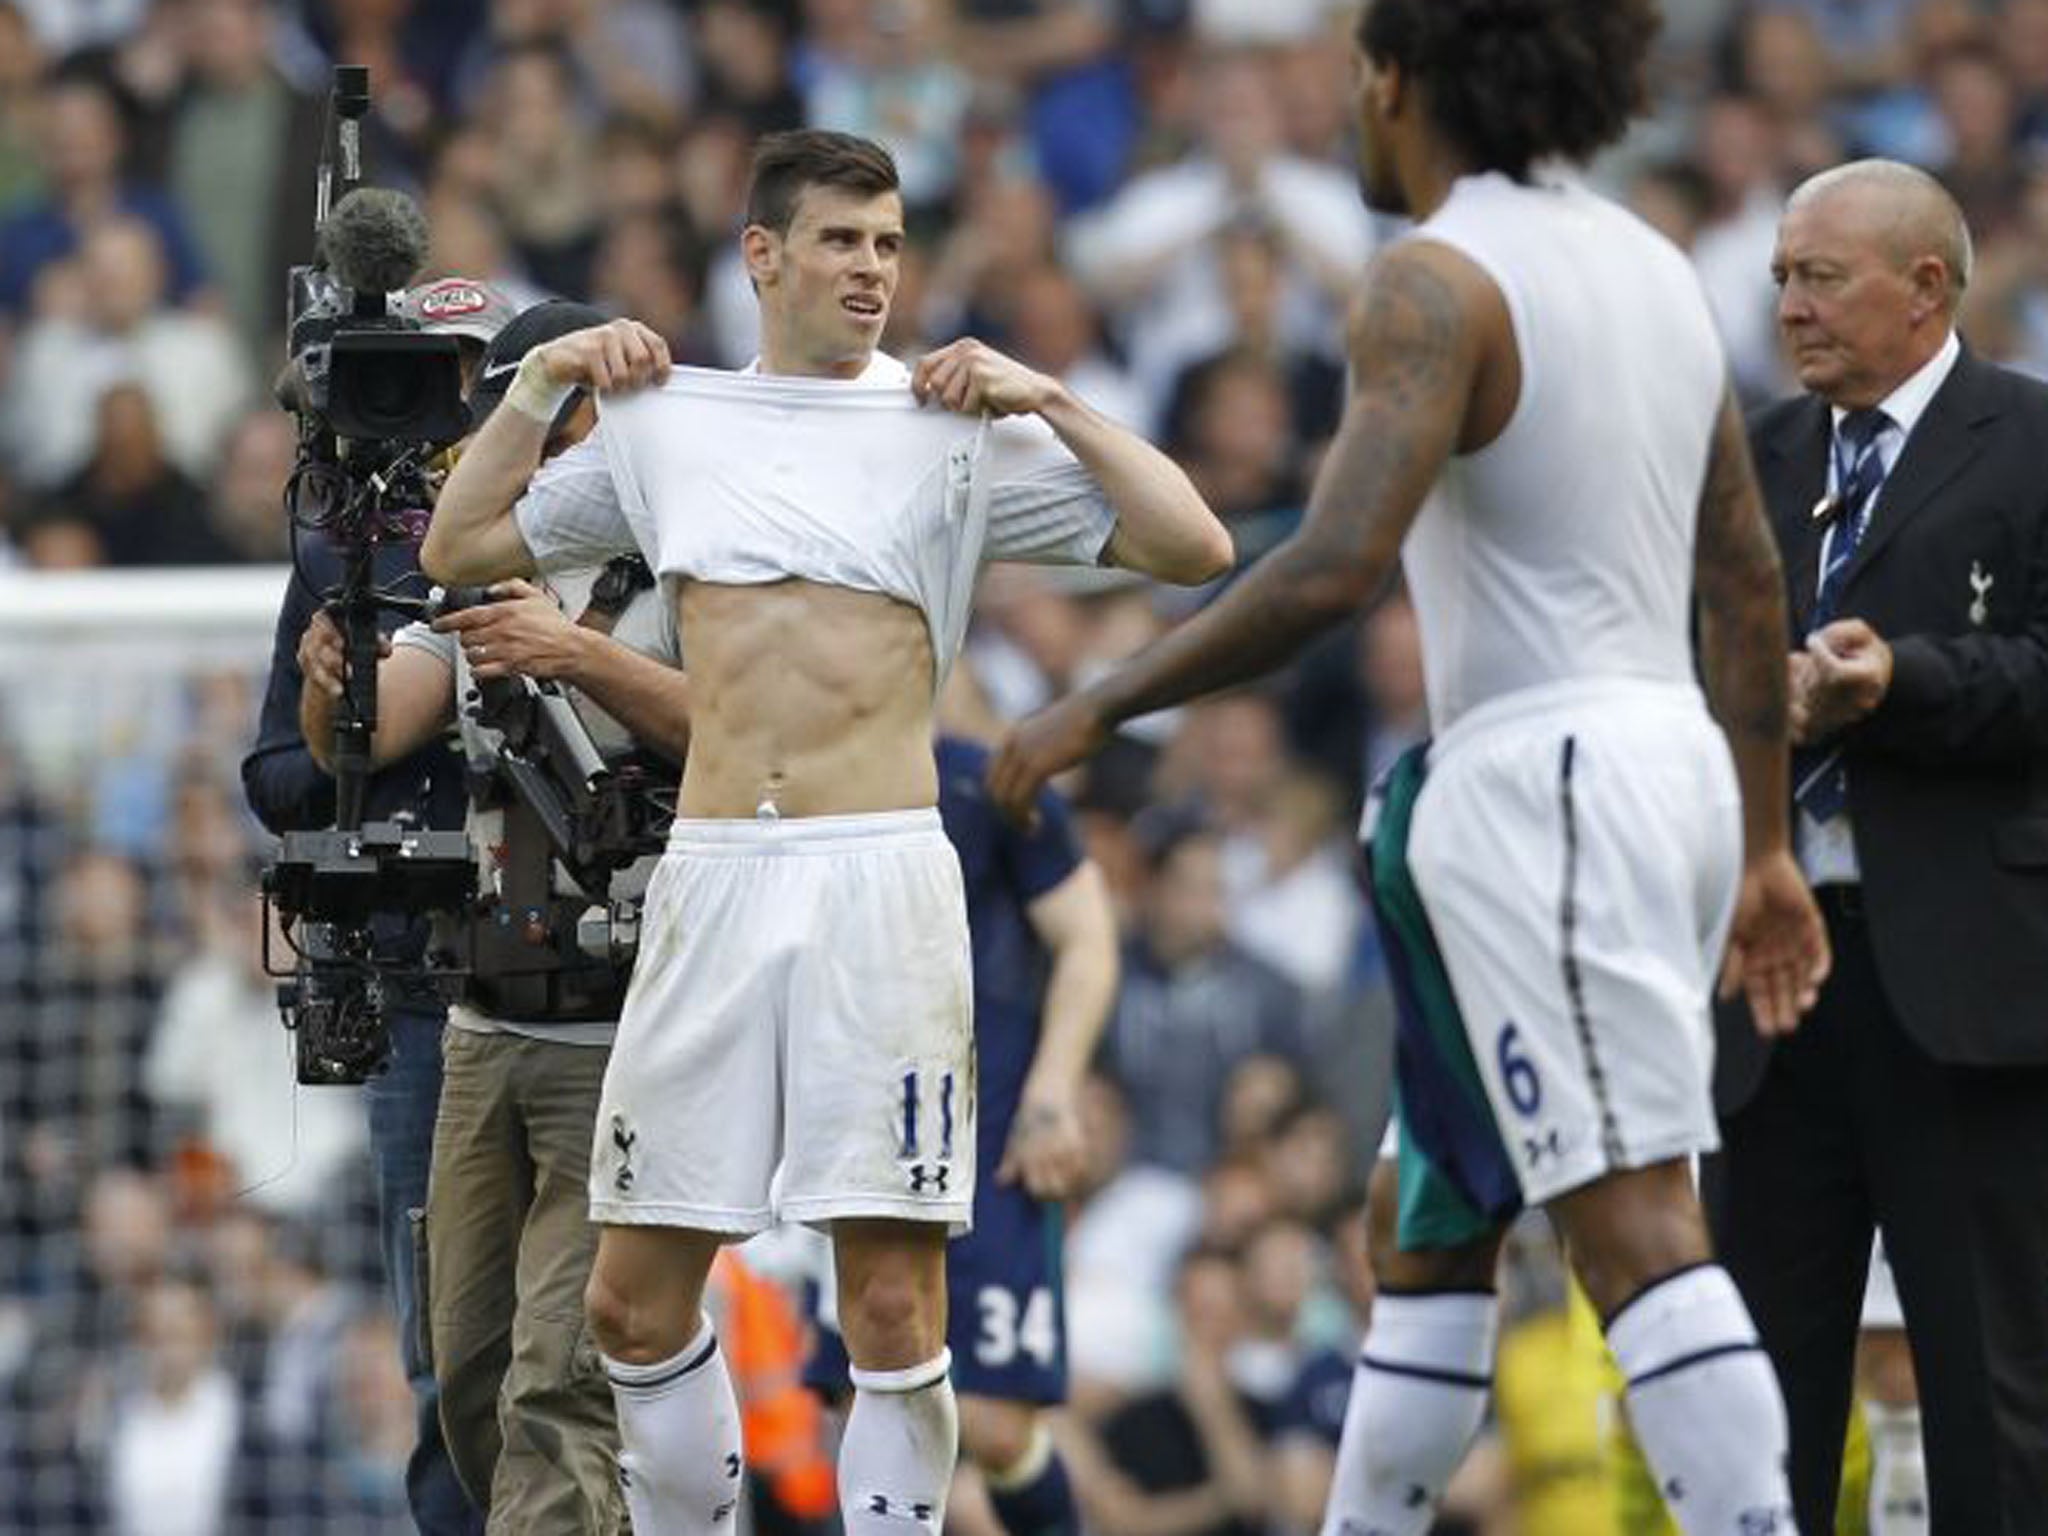 With the Arsenal win there was heartache for their rivals Tottenham Hotspur, including Gareth Bale, as they were pipped to fourth place in the league (Ian Kington/AFP/Getty Images)